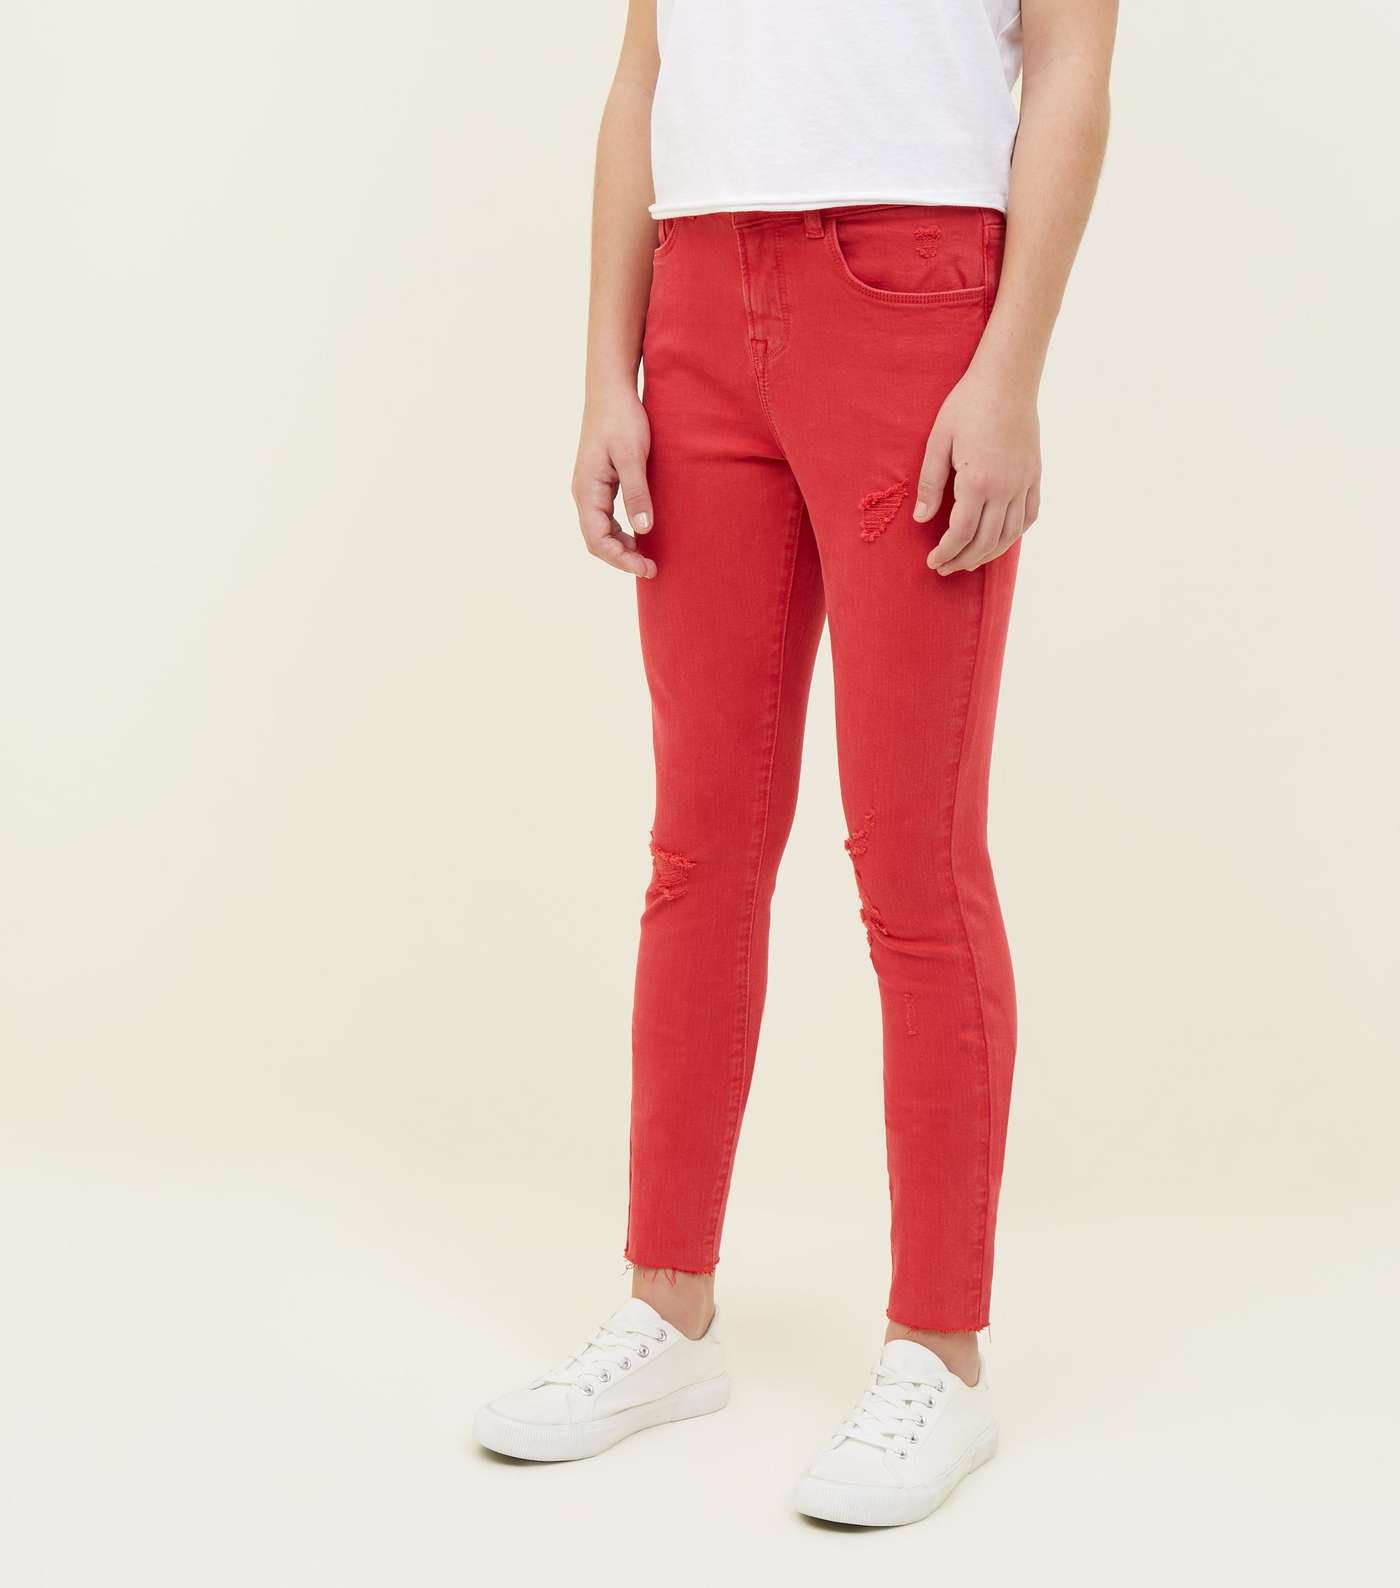 Girls Red Ripped Skinny Jeans  Image 2